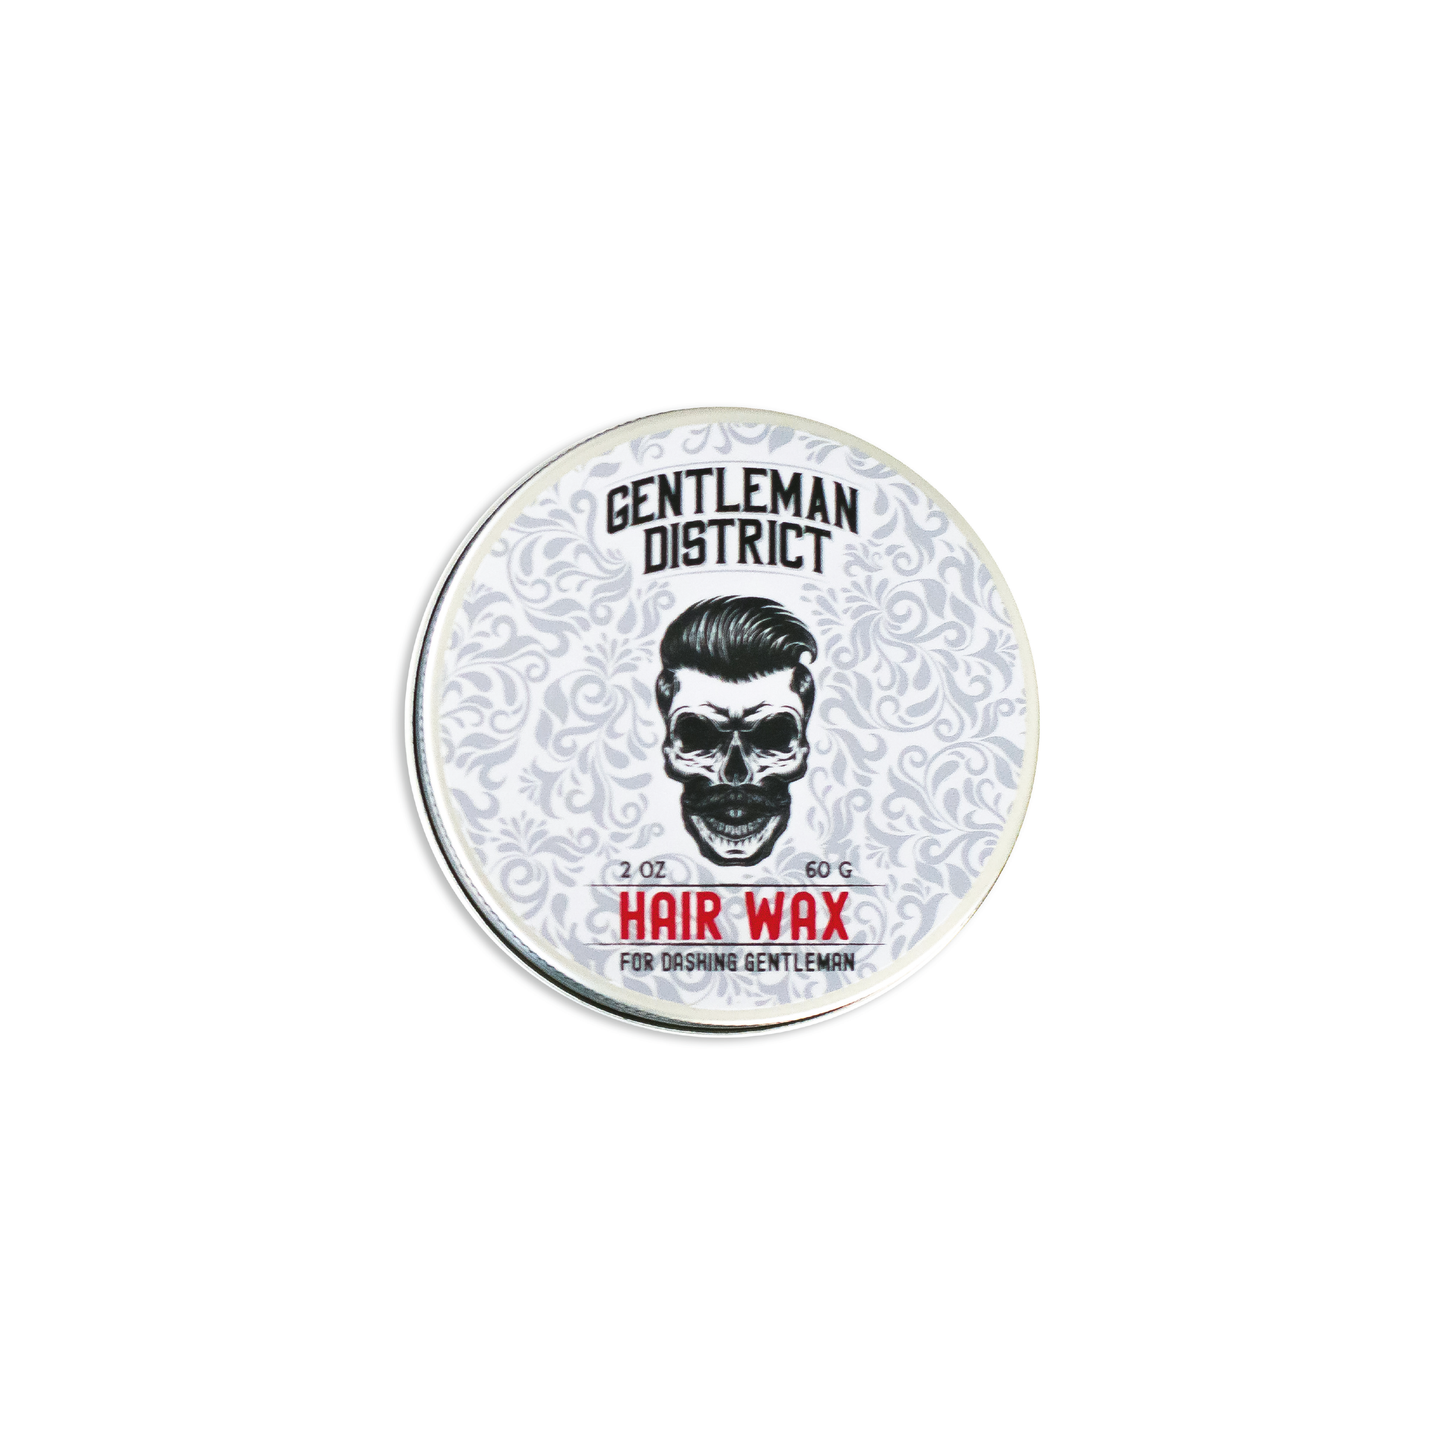 Capilo Gentleman District Hair Wax (2oz Container), Paraben Free, Salt Free, Sodium Sulfate Free, Silicone Free, Mineral Oil and Petrolatum Free.